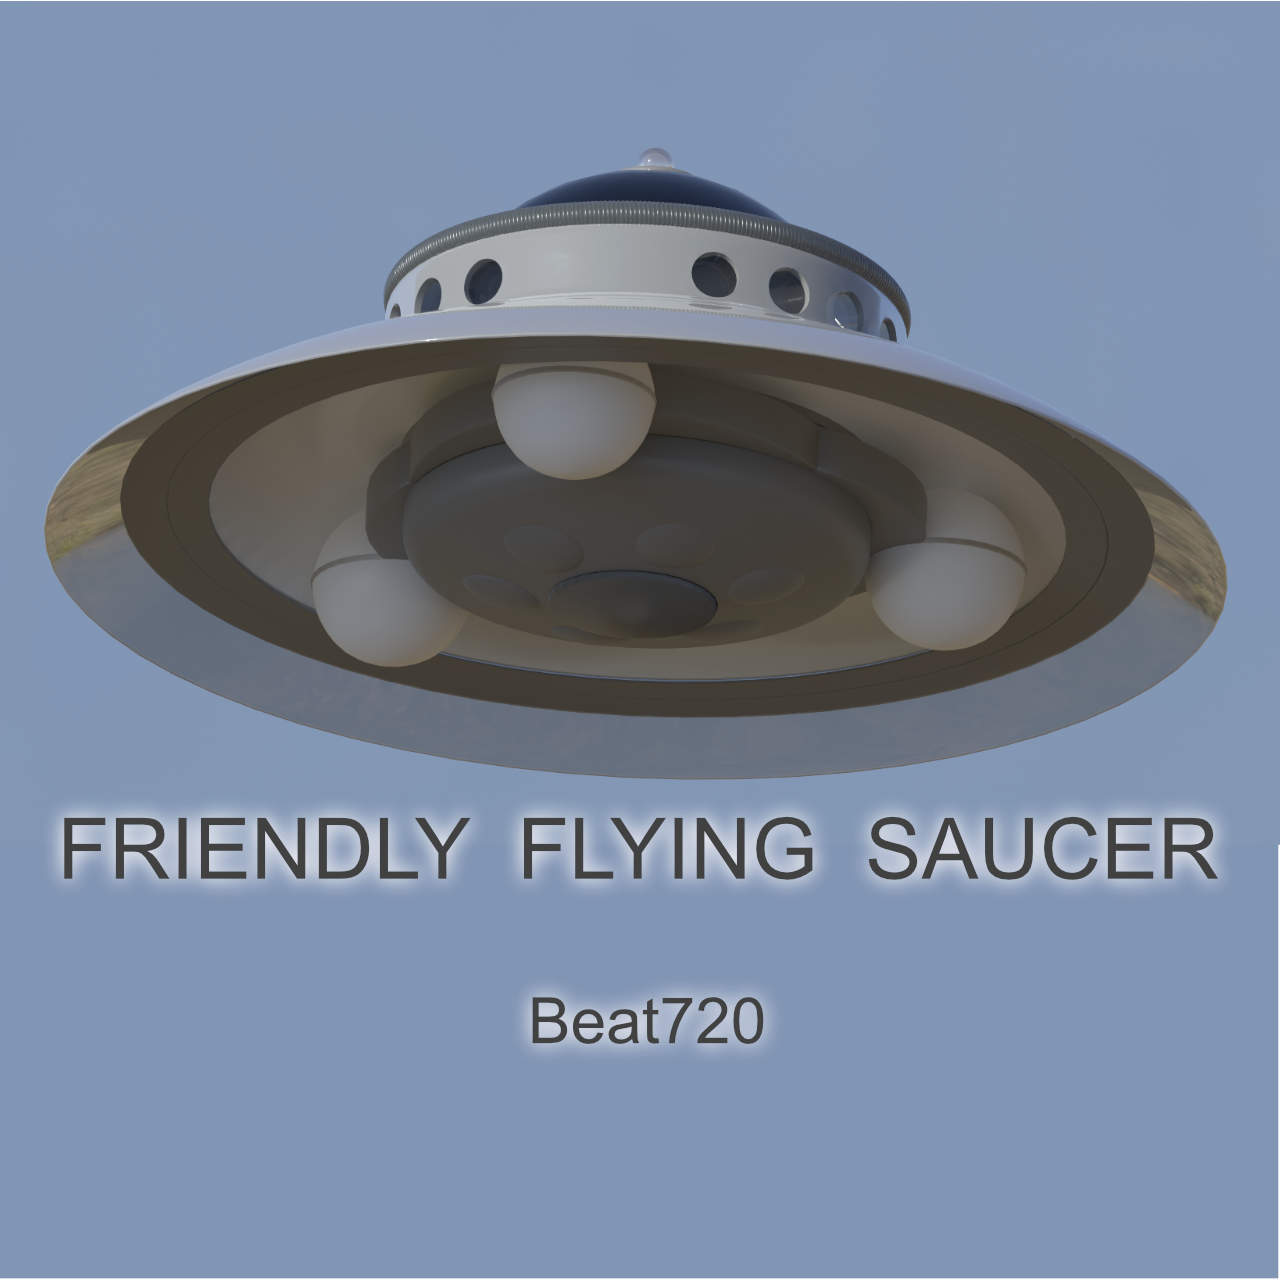 FRIENDLY FLYING SAUCER